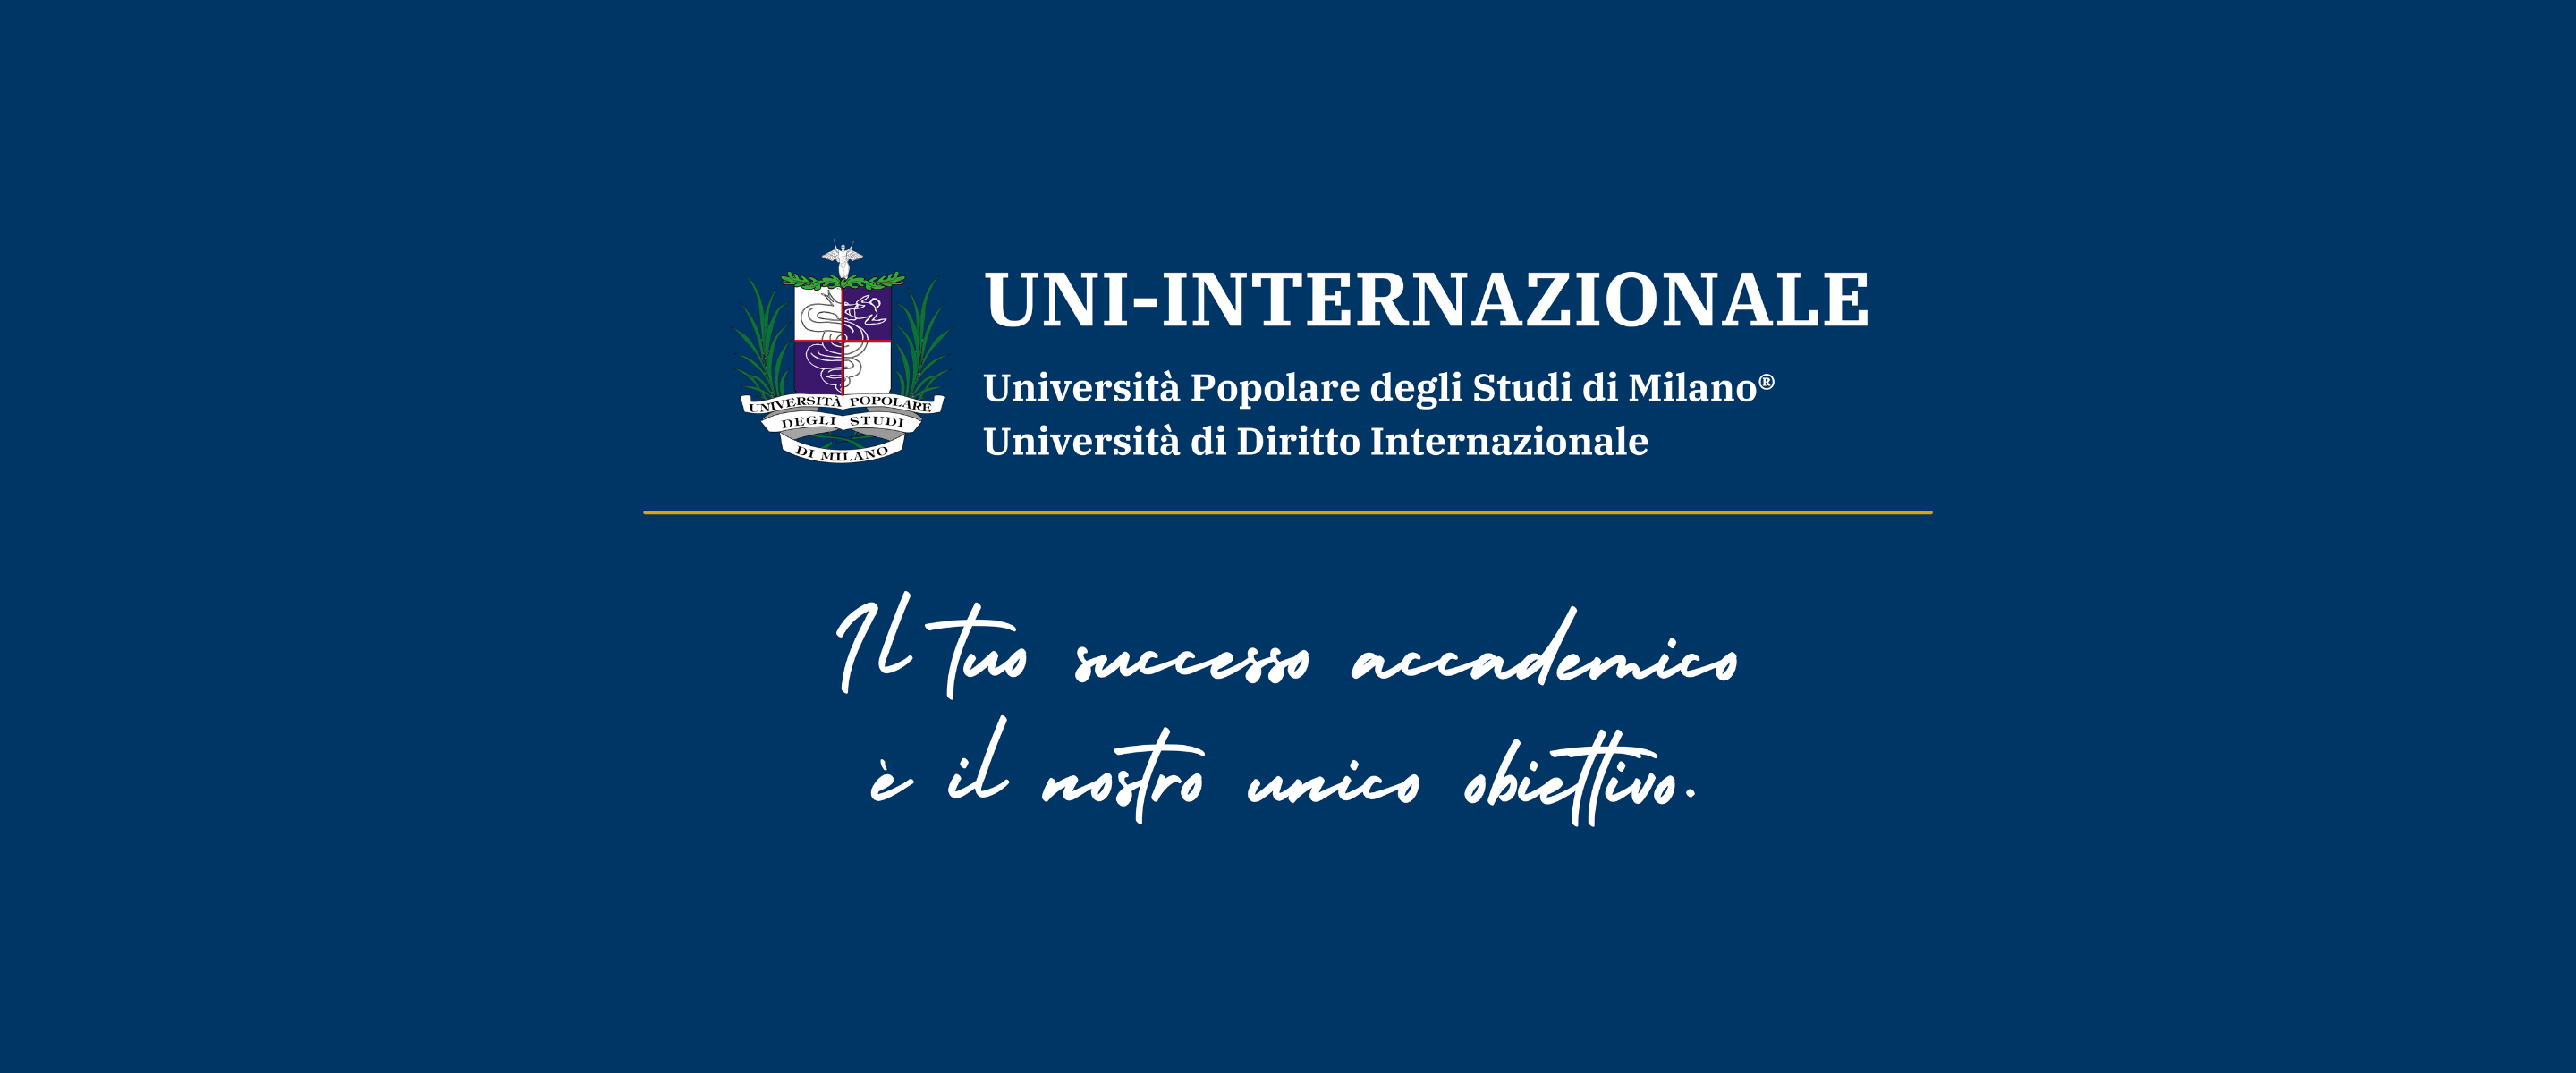 Popular University of Milan, a look at the online teaching materials